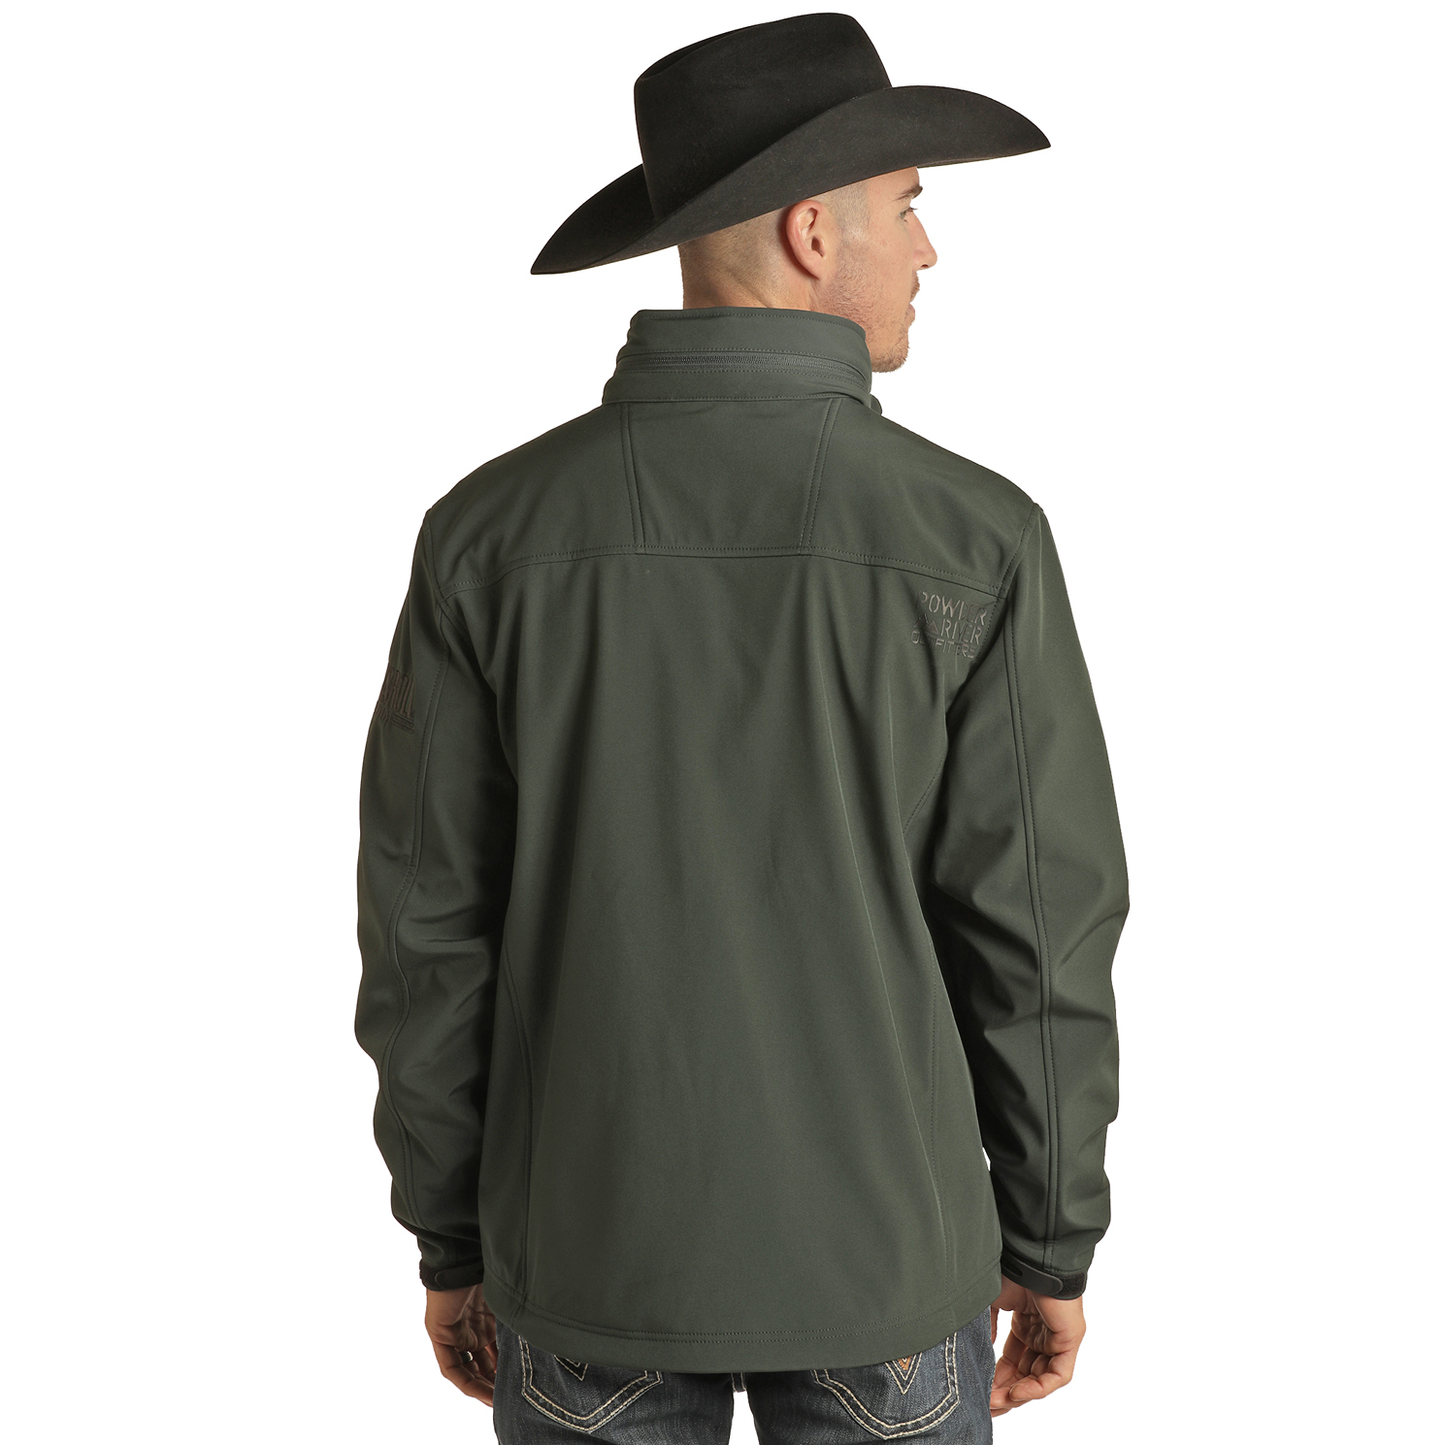 Powder River Outfitters® Men's Softshell Green Jacket PRMO92RZYC-30